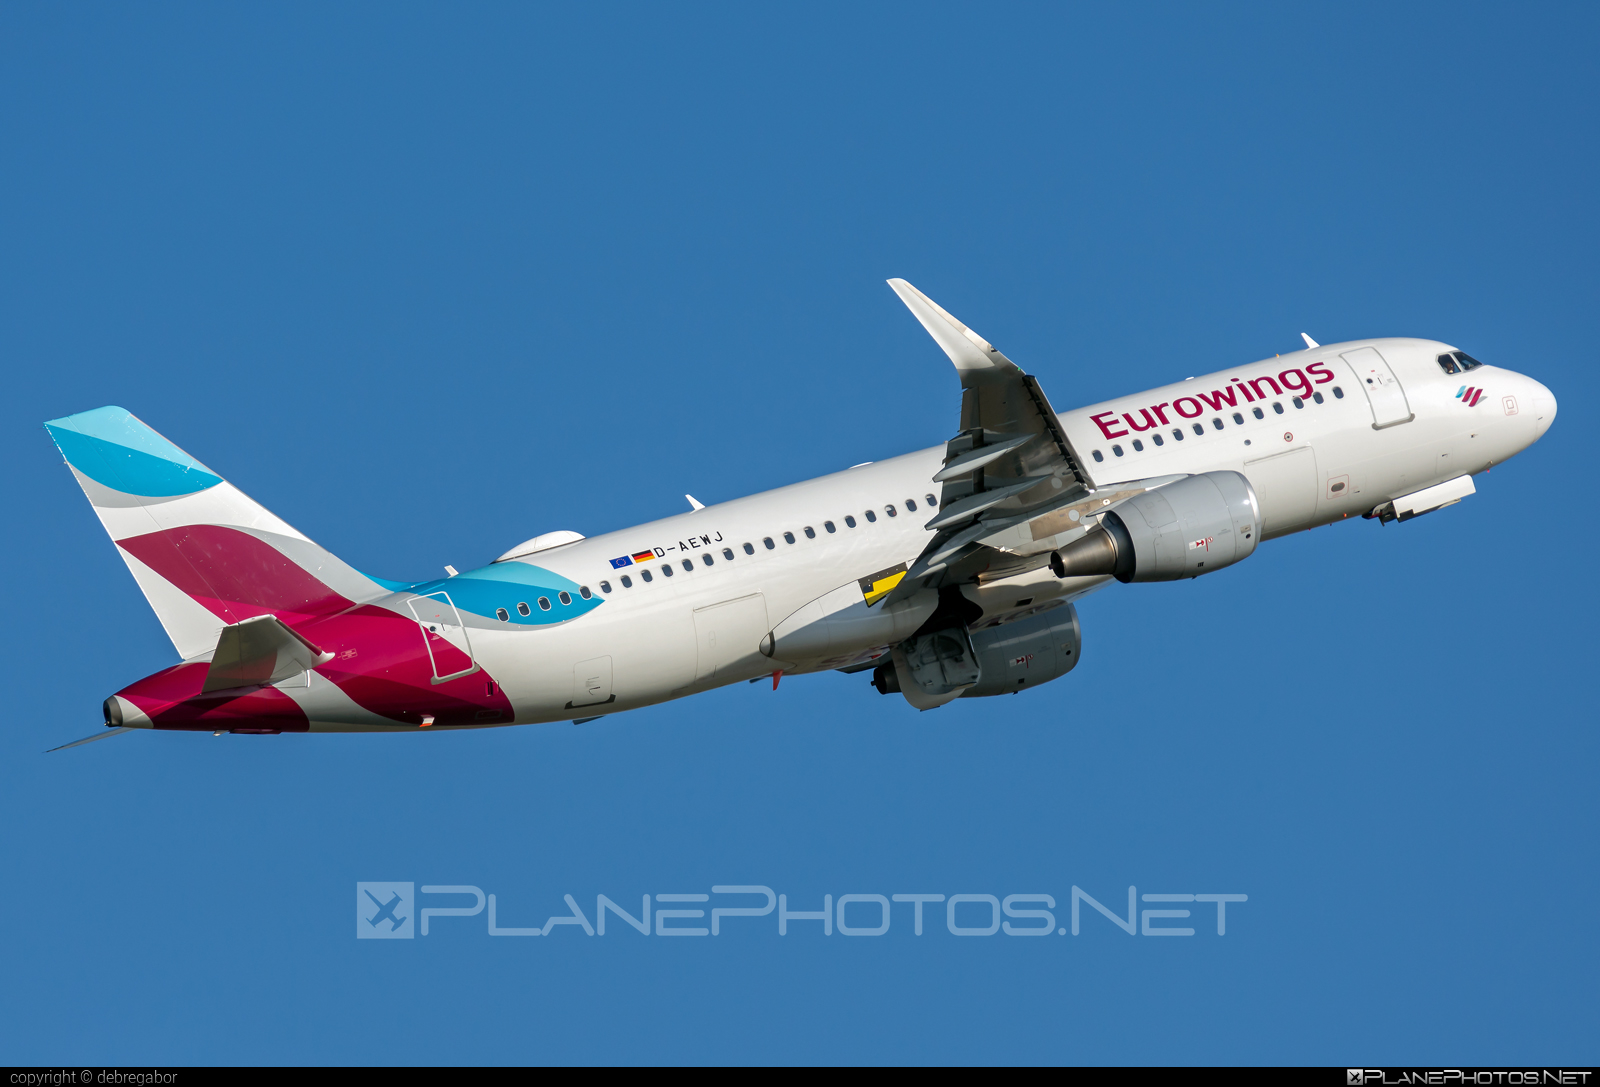 Airbus A320-214 - D-AEWJ operated by Eurowings #a320 #a320family #airbus #airbus320 #eurowings